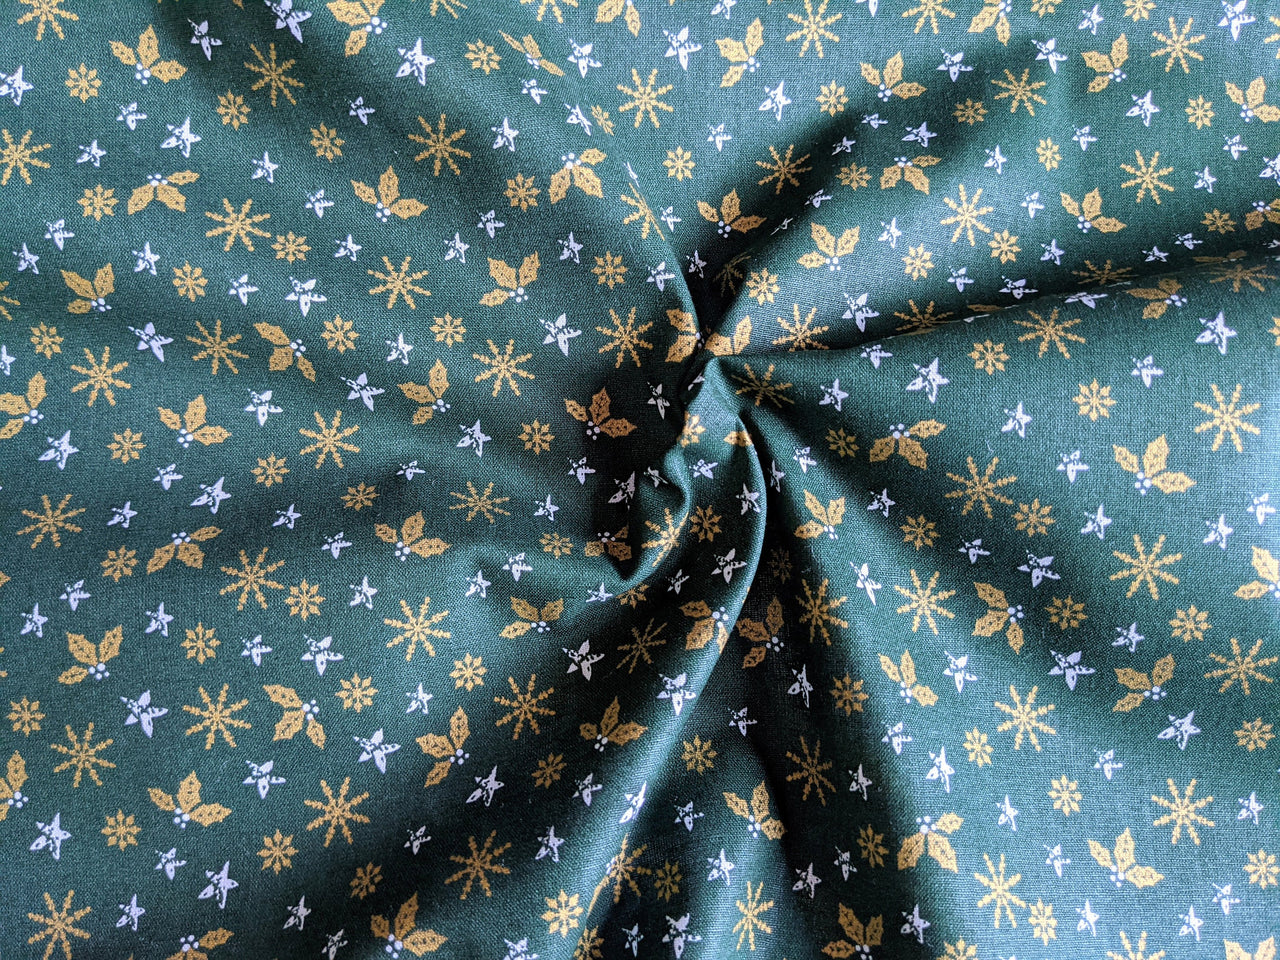 Green Cotton Holly Leaves Snowflakes Christmas Fabric, Festive Fabric, Holiday Fabric